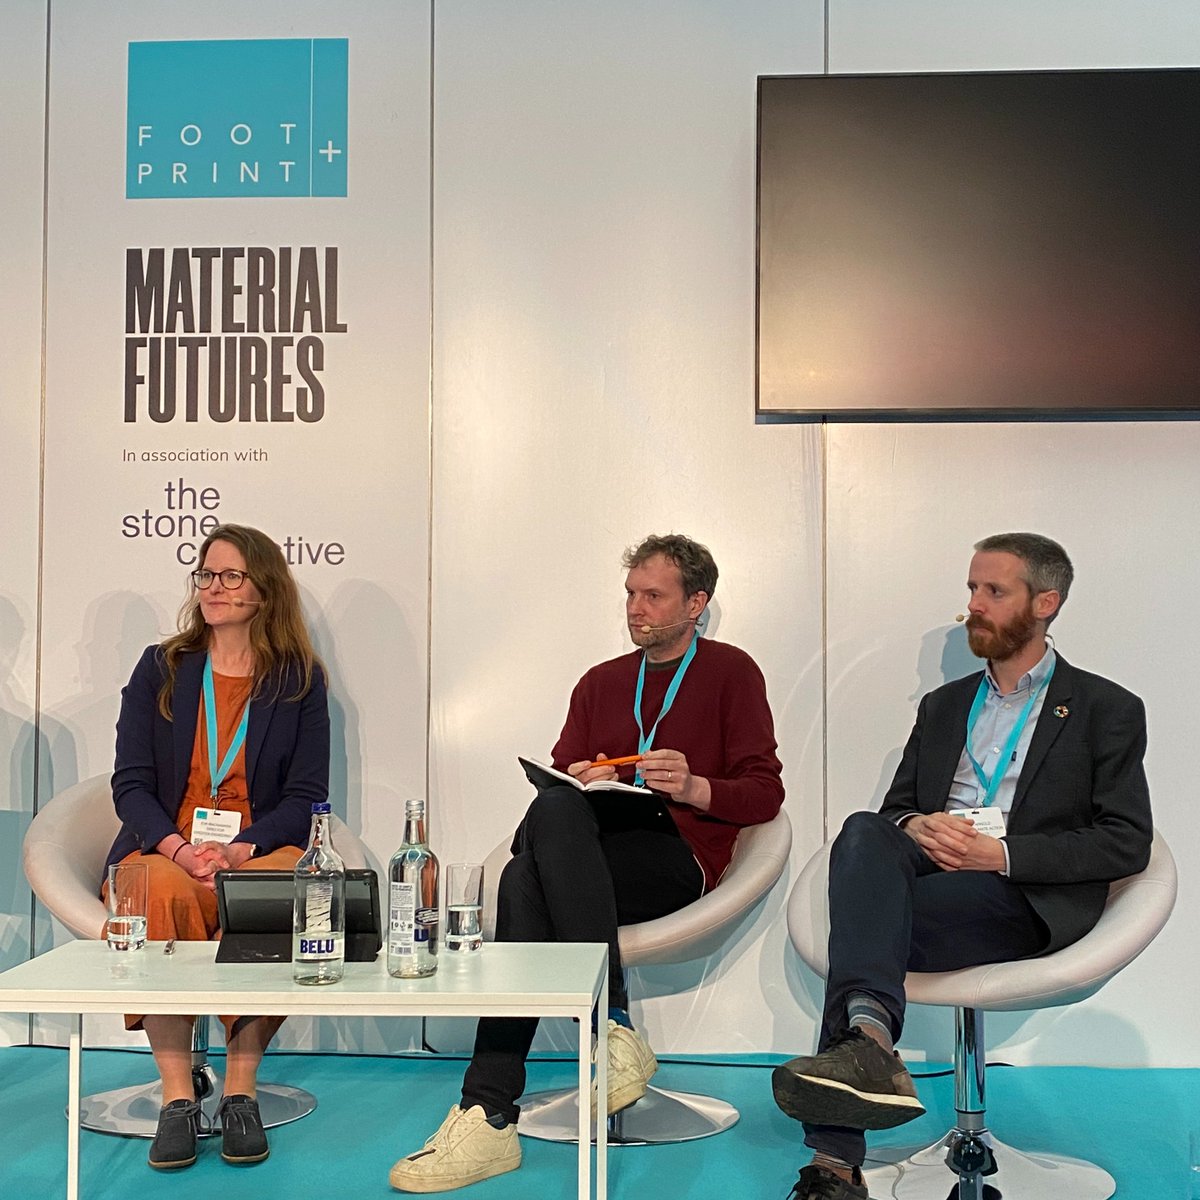 Catch a glimpse of us at FOOTPRINT+ today as we shared insights on materials' ecological impact. Our challenge is to understand supply chains and their nature impacts. To reduce impacts, prioritise #lessstuff, boost #retrofitting and transition to a #circulareconomy.